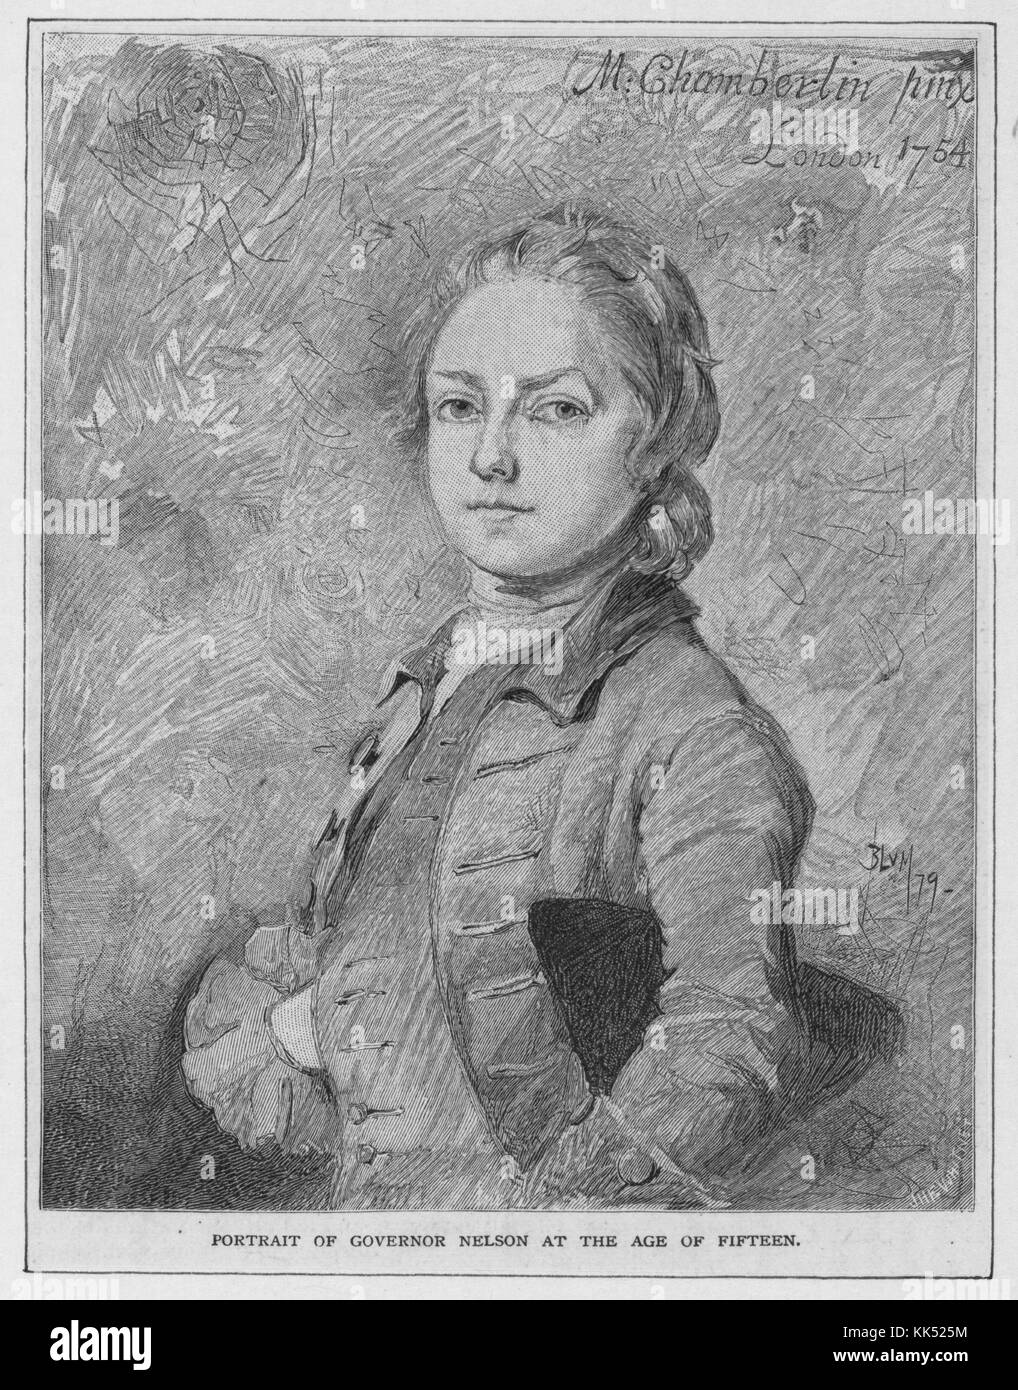 Wood engraving portrait of Thomas Nelson, Junior, a planter, statesman, and soldier, signer of the Declaration of Independence in 1776, and Virginias fourth Governor, titled 'Portrait of Governor Nelson at the age of fifteen', 1880. From the New York Public Library. Stock Photo